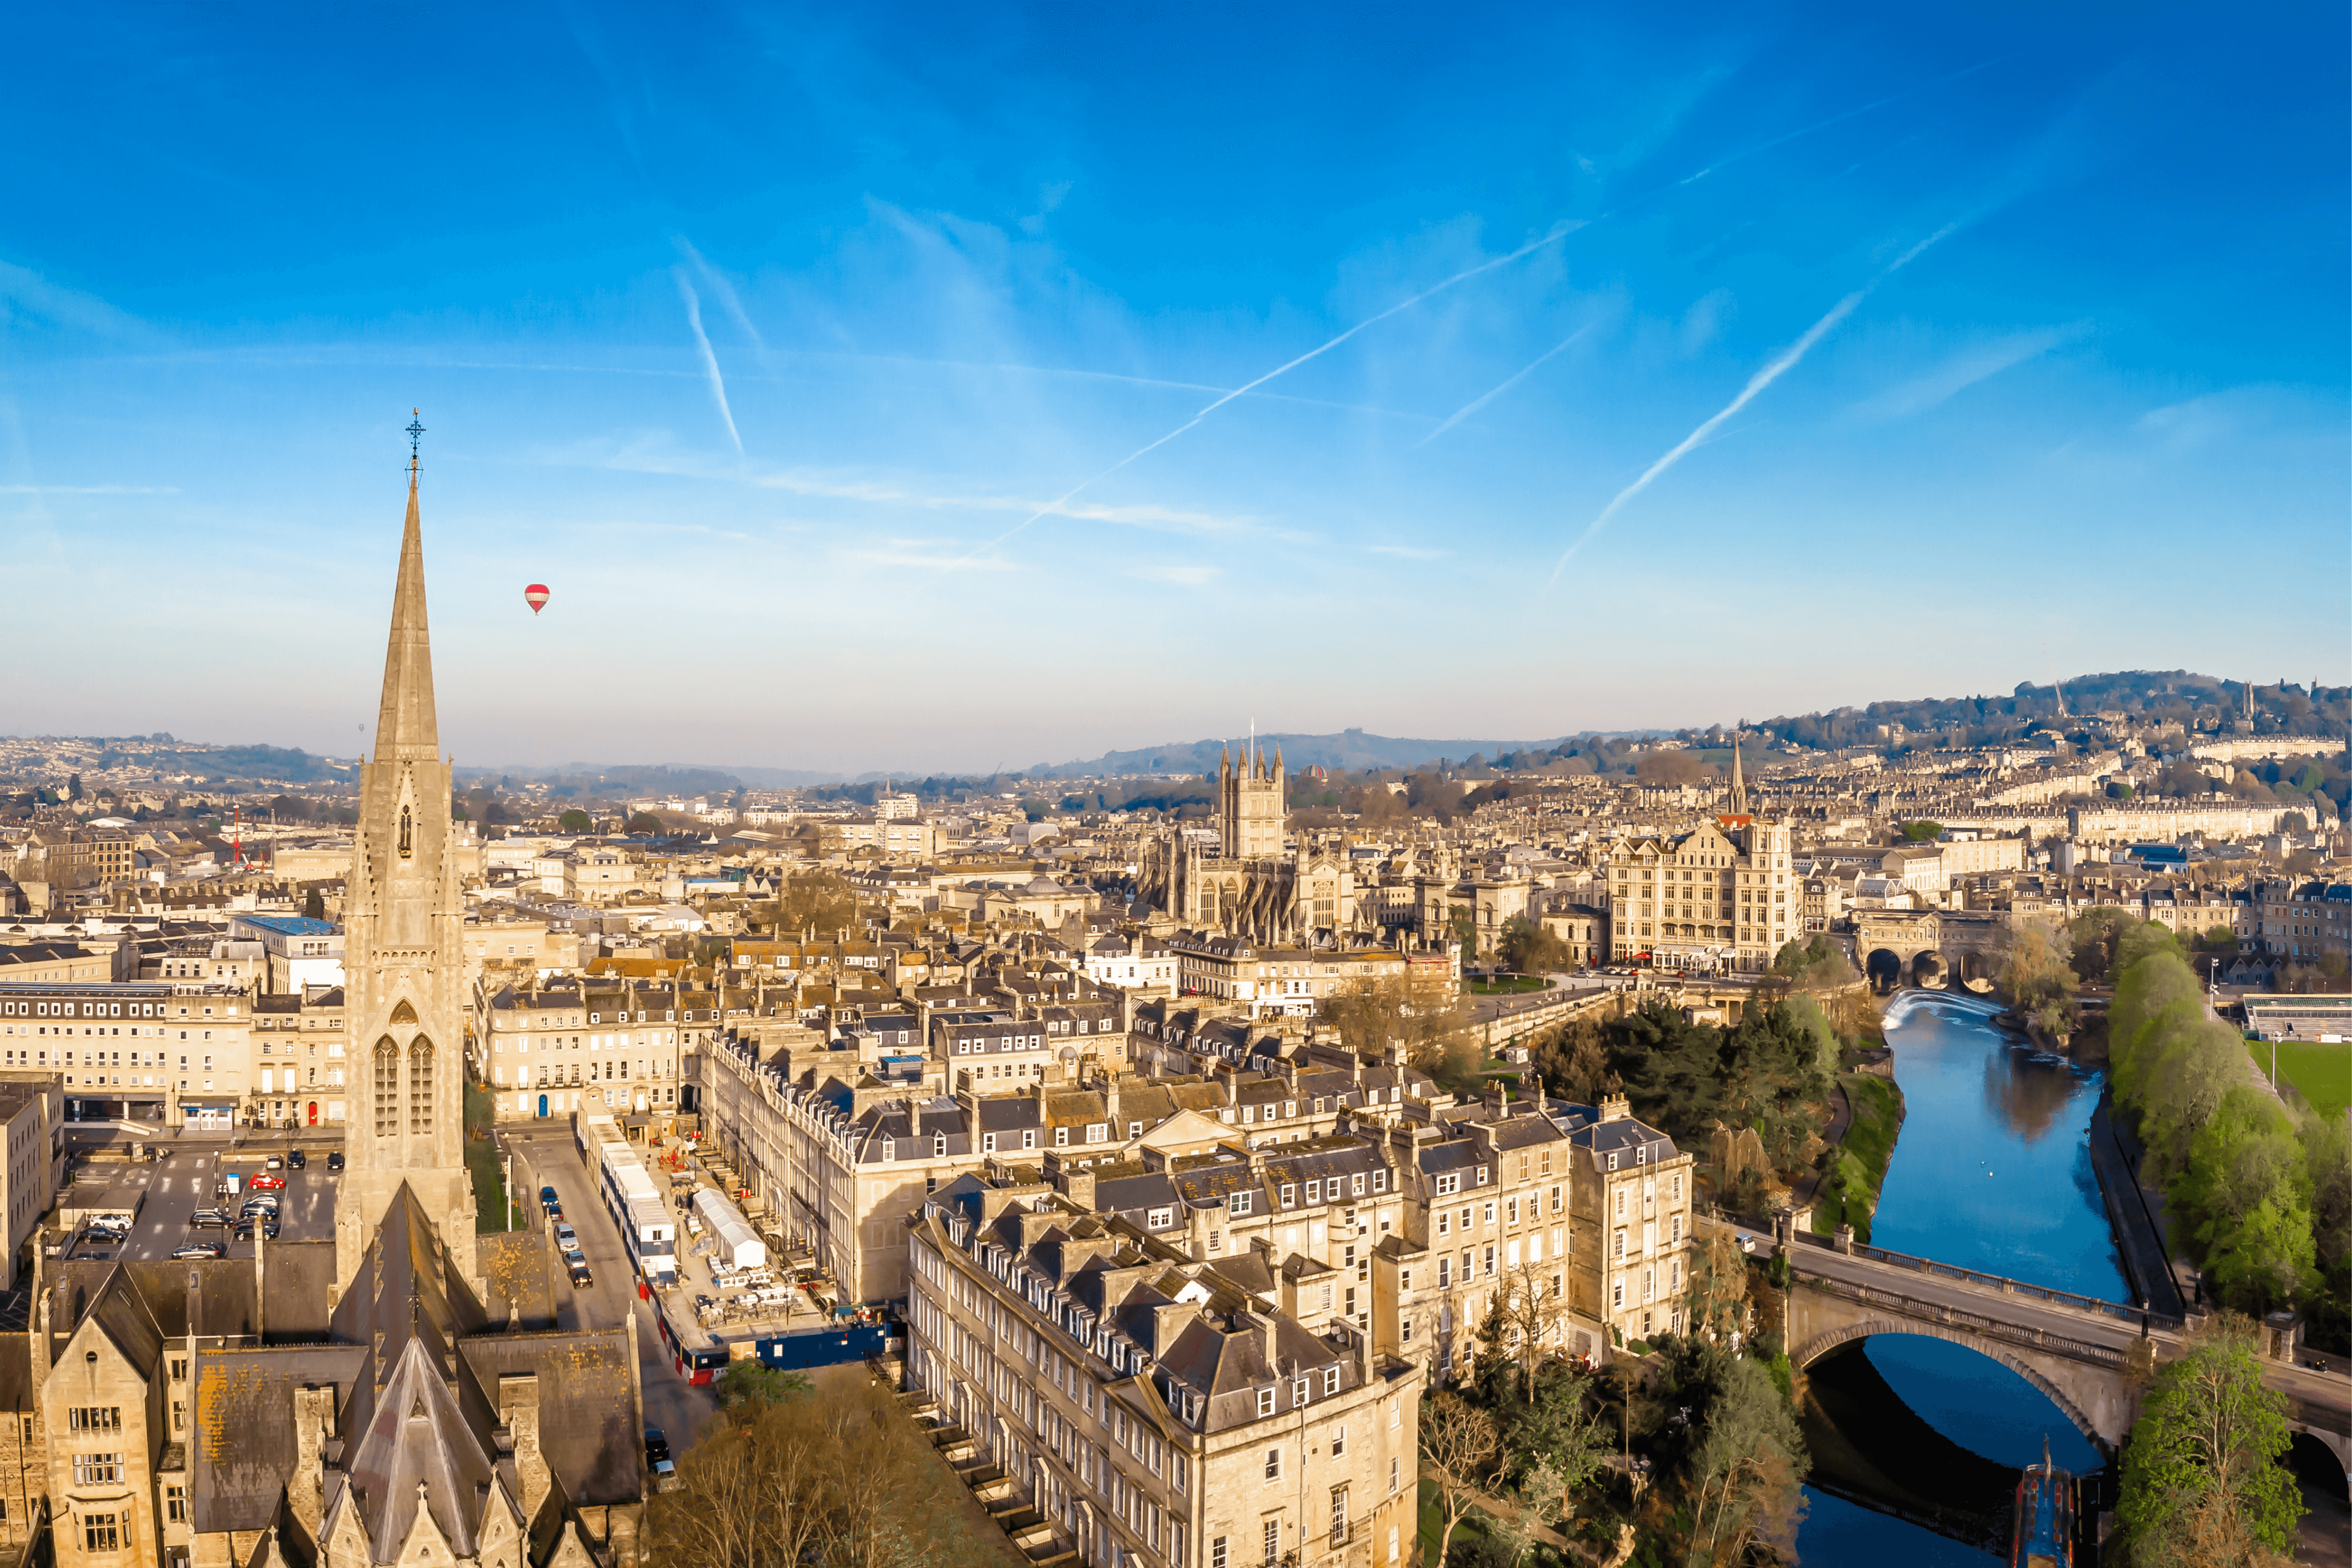 How to do a day trip to Bath from London